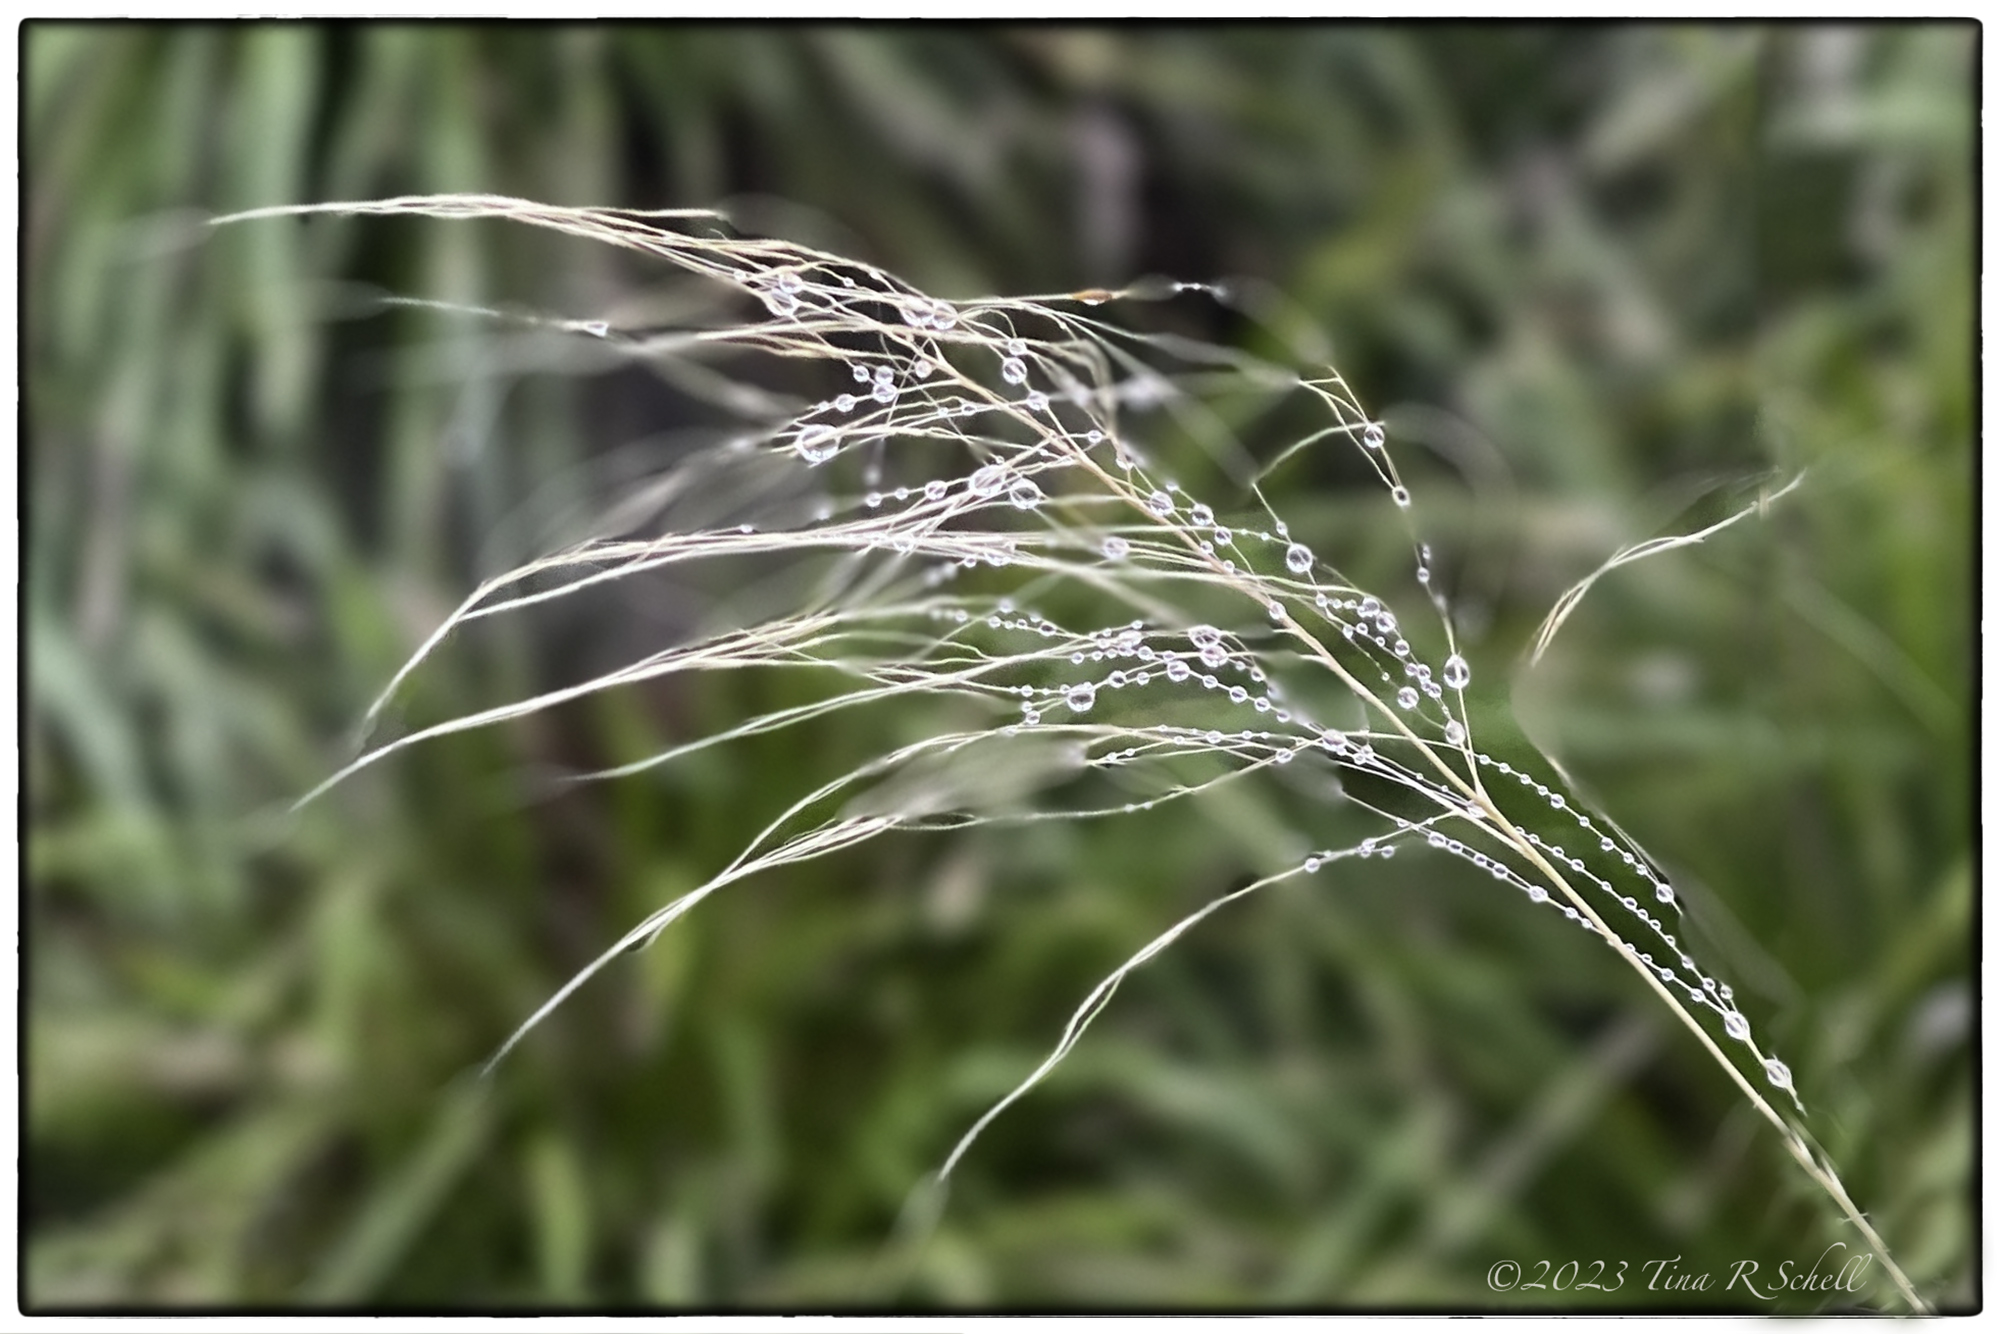 droplets, sweetgrass, branch